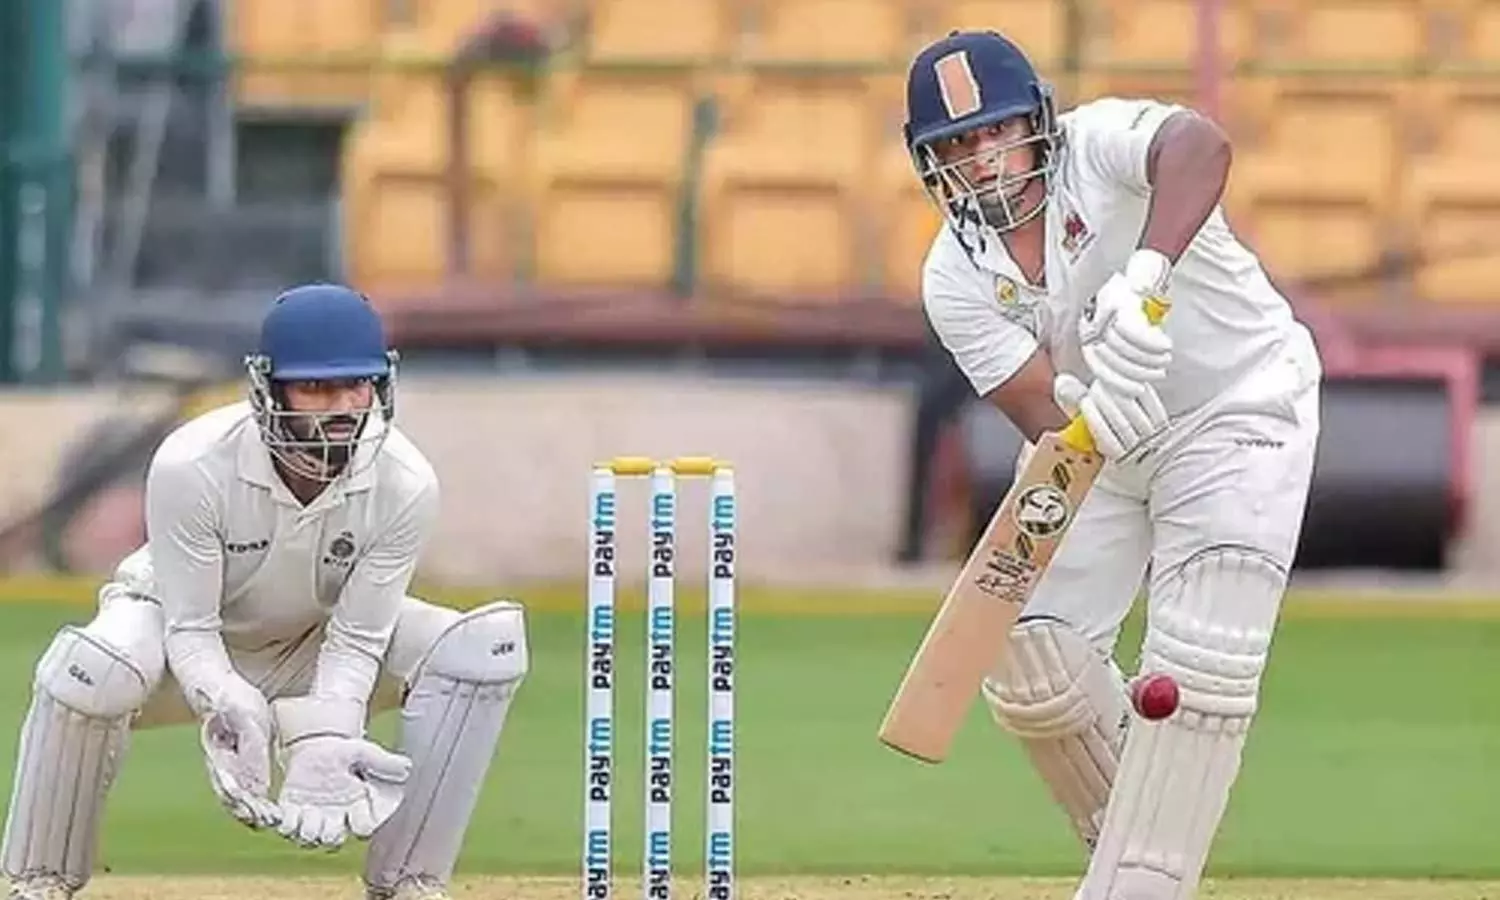 Ranji Trophy Final: Mumbai all out for 374 runs in first inning against Madhya Pradesh